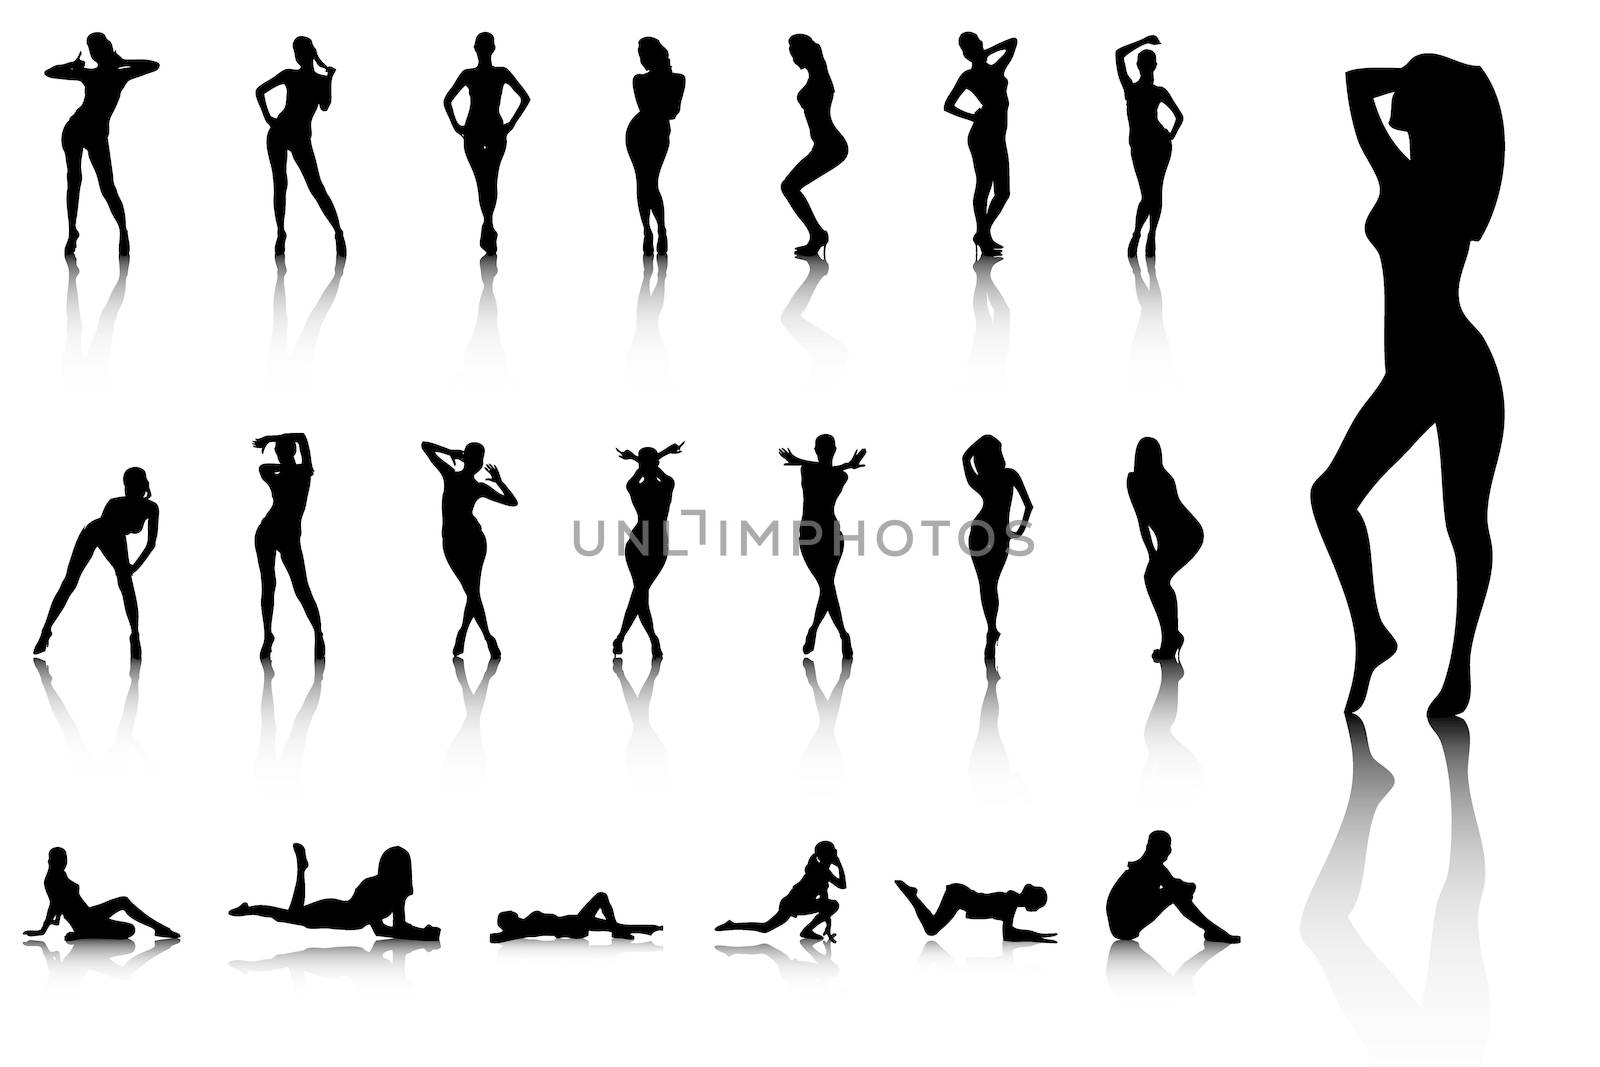 An Illustration of Set of sexy women silhouettes